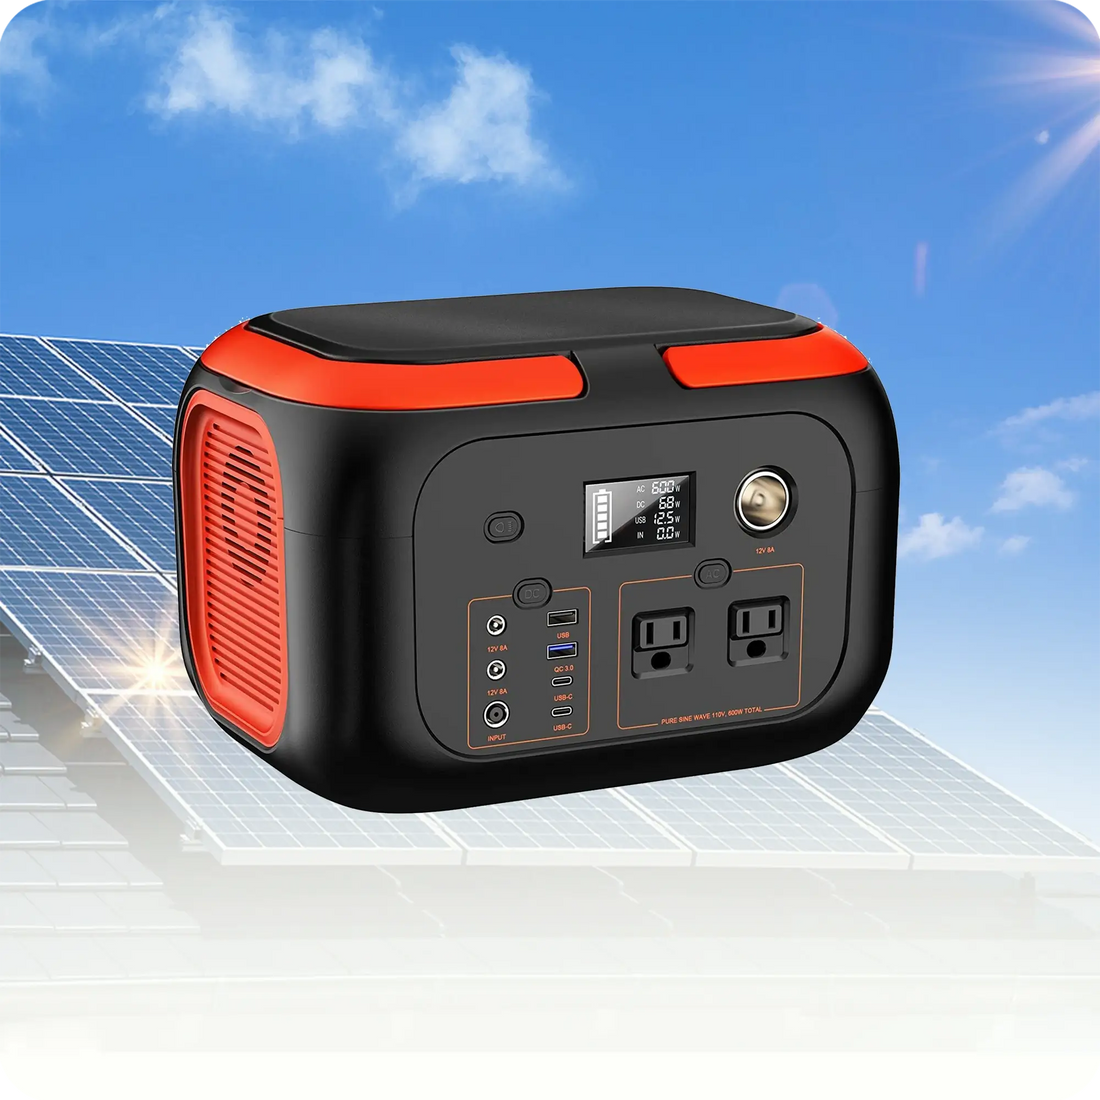 296Wh Portable Power Bank Station Solar Generator Lithium Battery Backup Supply 